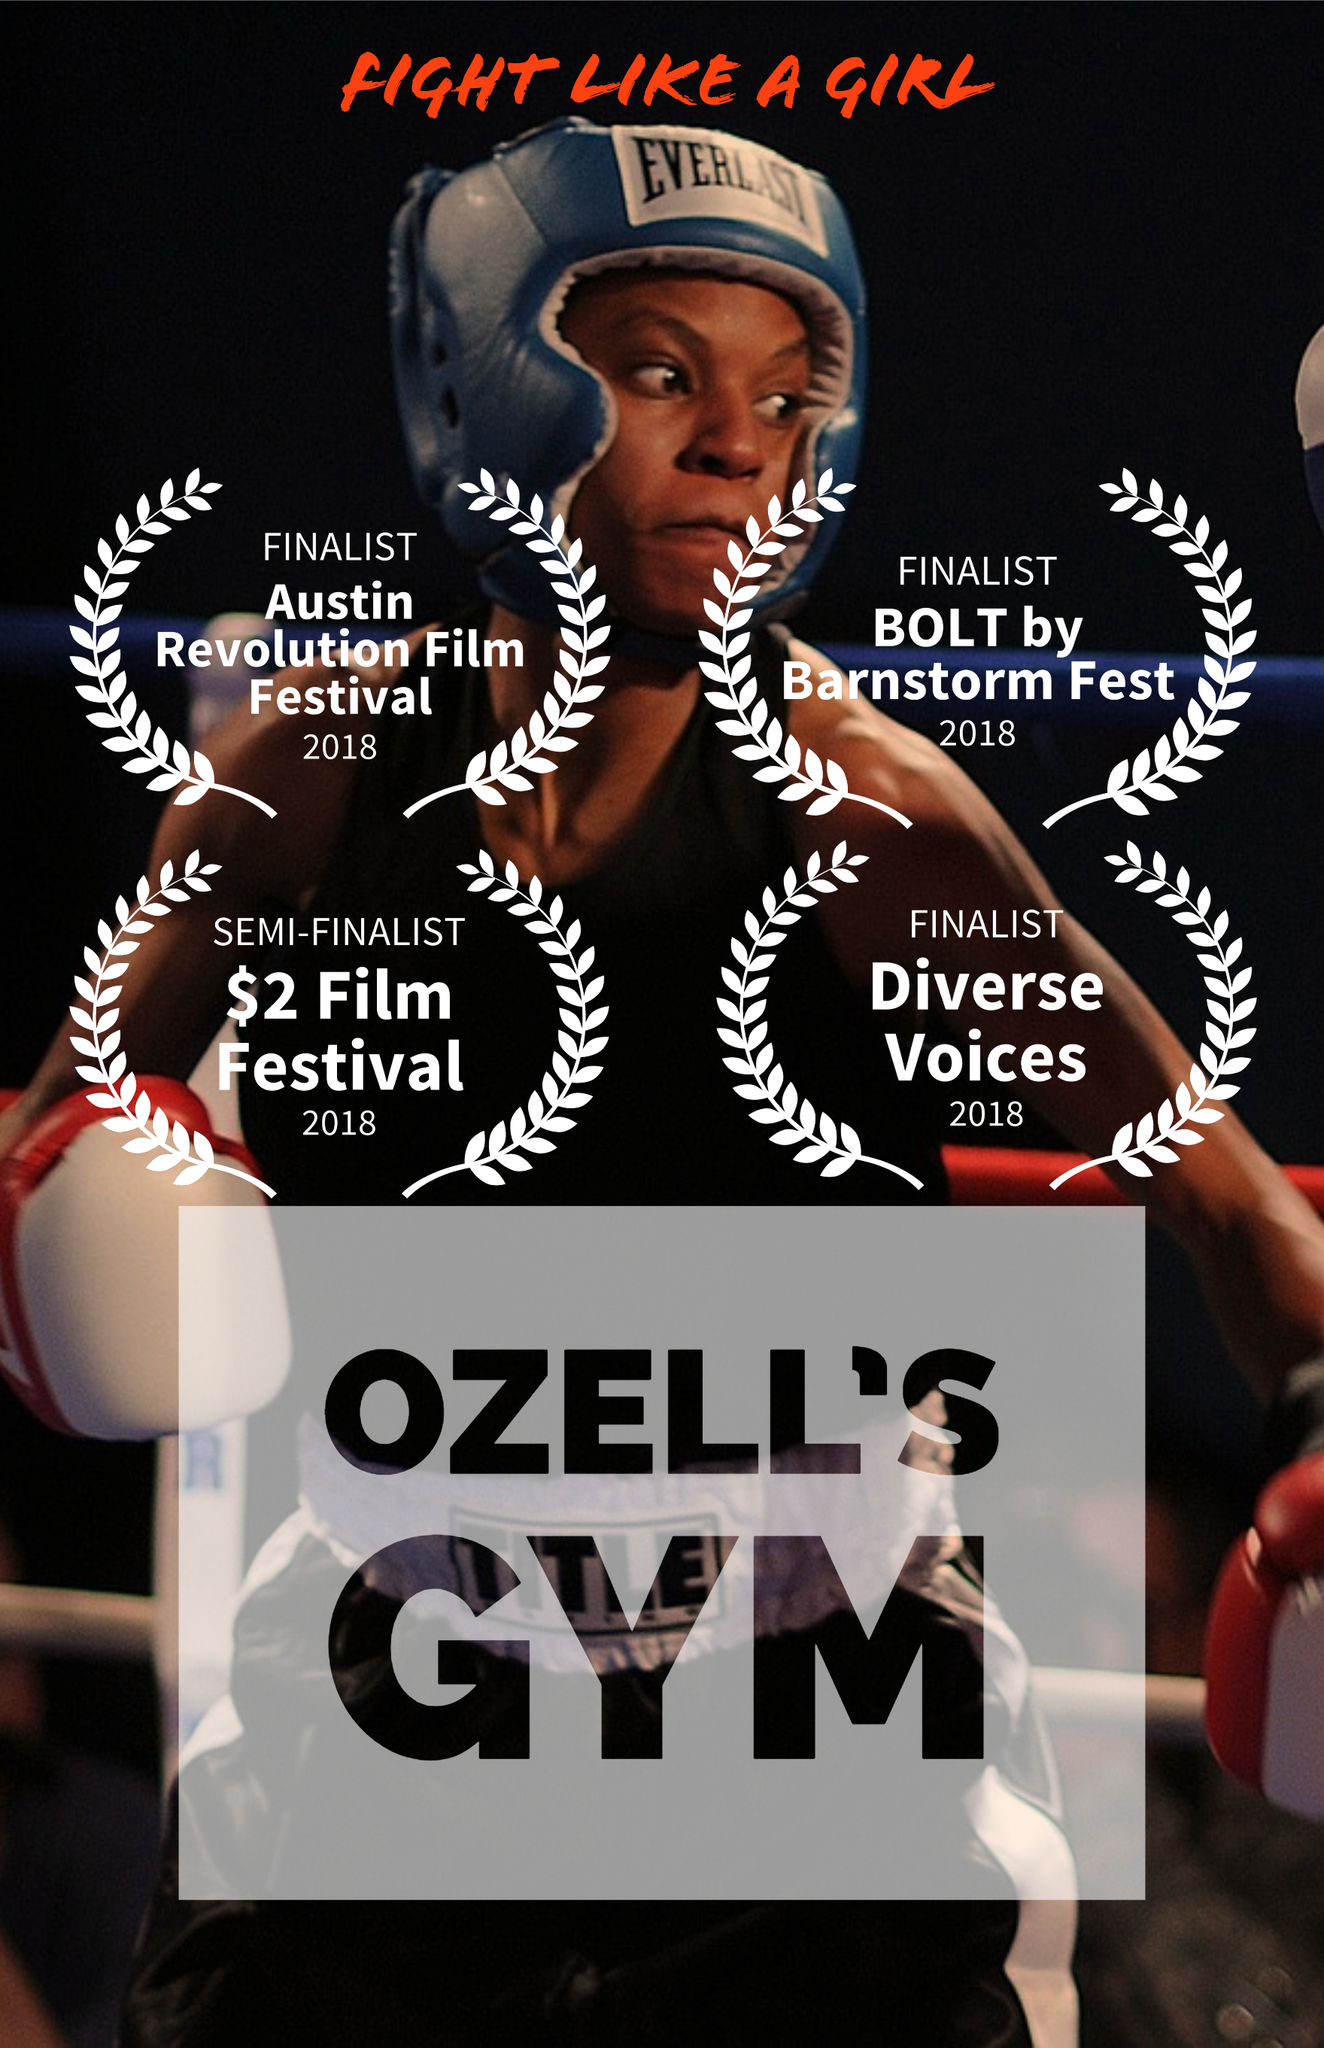 OZELL'S GYM